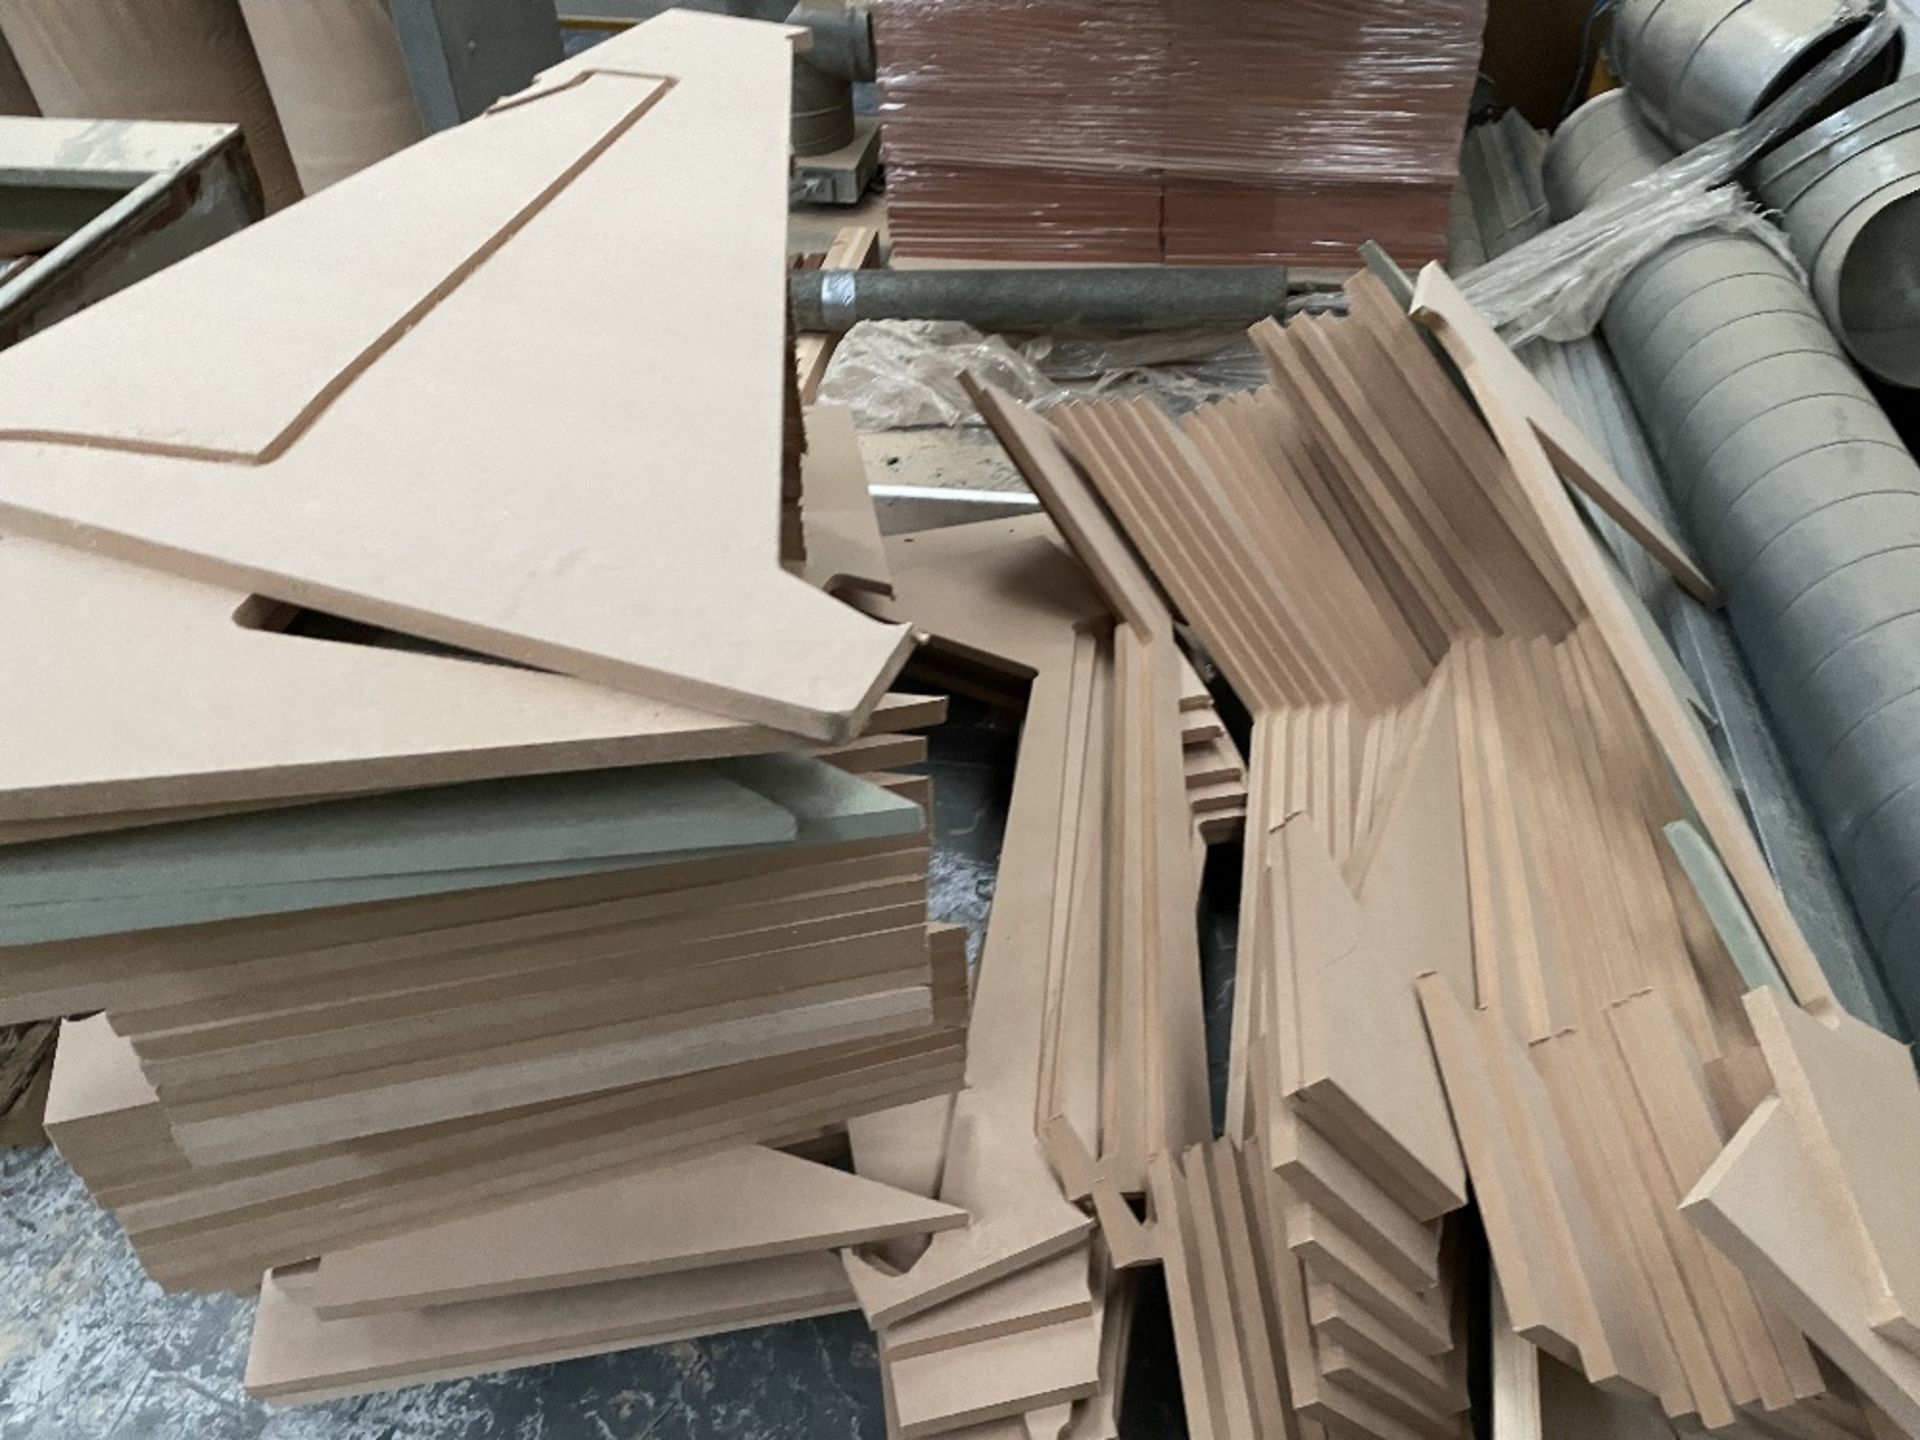 Large Quantity of Wood Stock & Off Cuts - As Pictured - Image 10 of 13